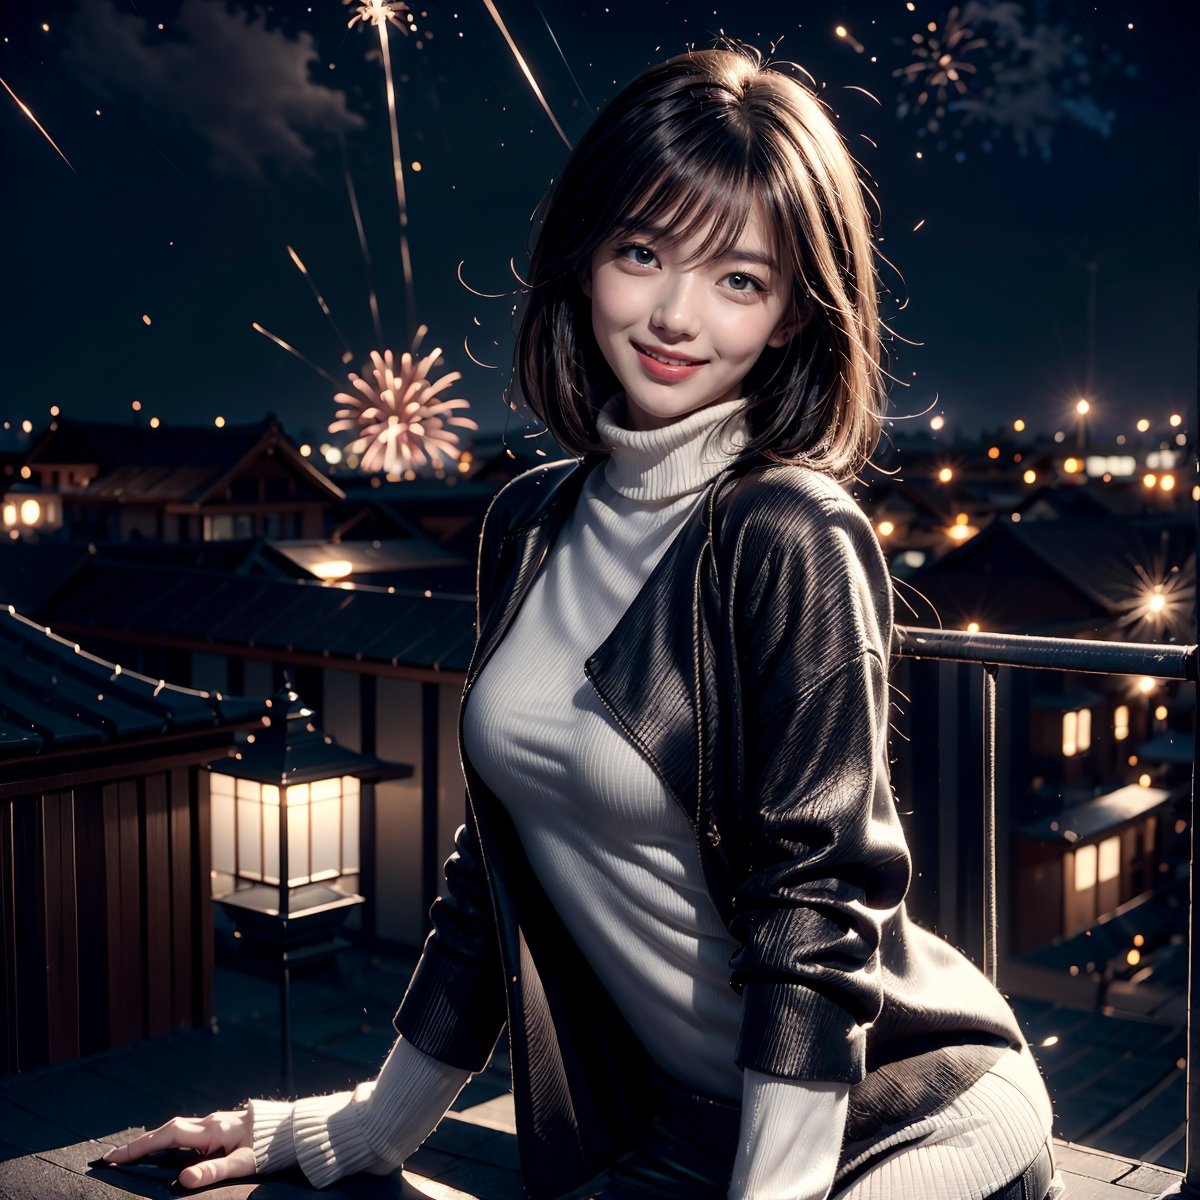 Fractal art that is mesmerizing and visually stunning. Official art, masterpiece. 4K high resolution rendering. One Japanese female, 17 years old, 5 feet tall. Straight, medium bob black hair, bangs, dark brown eyes, short eyelashes. Smiling face. Small breasts, nice legs. Building rooftop, iron fence, night, night view, starry sky, fireworks. Long warm wool coat, white turtleneck sweater, leather pants. Cowboy shot.,1 girl,Ava